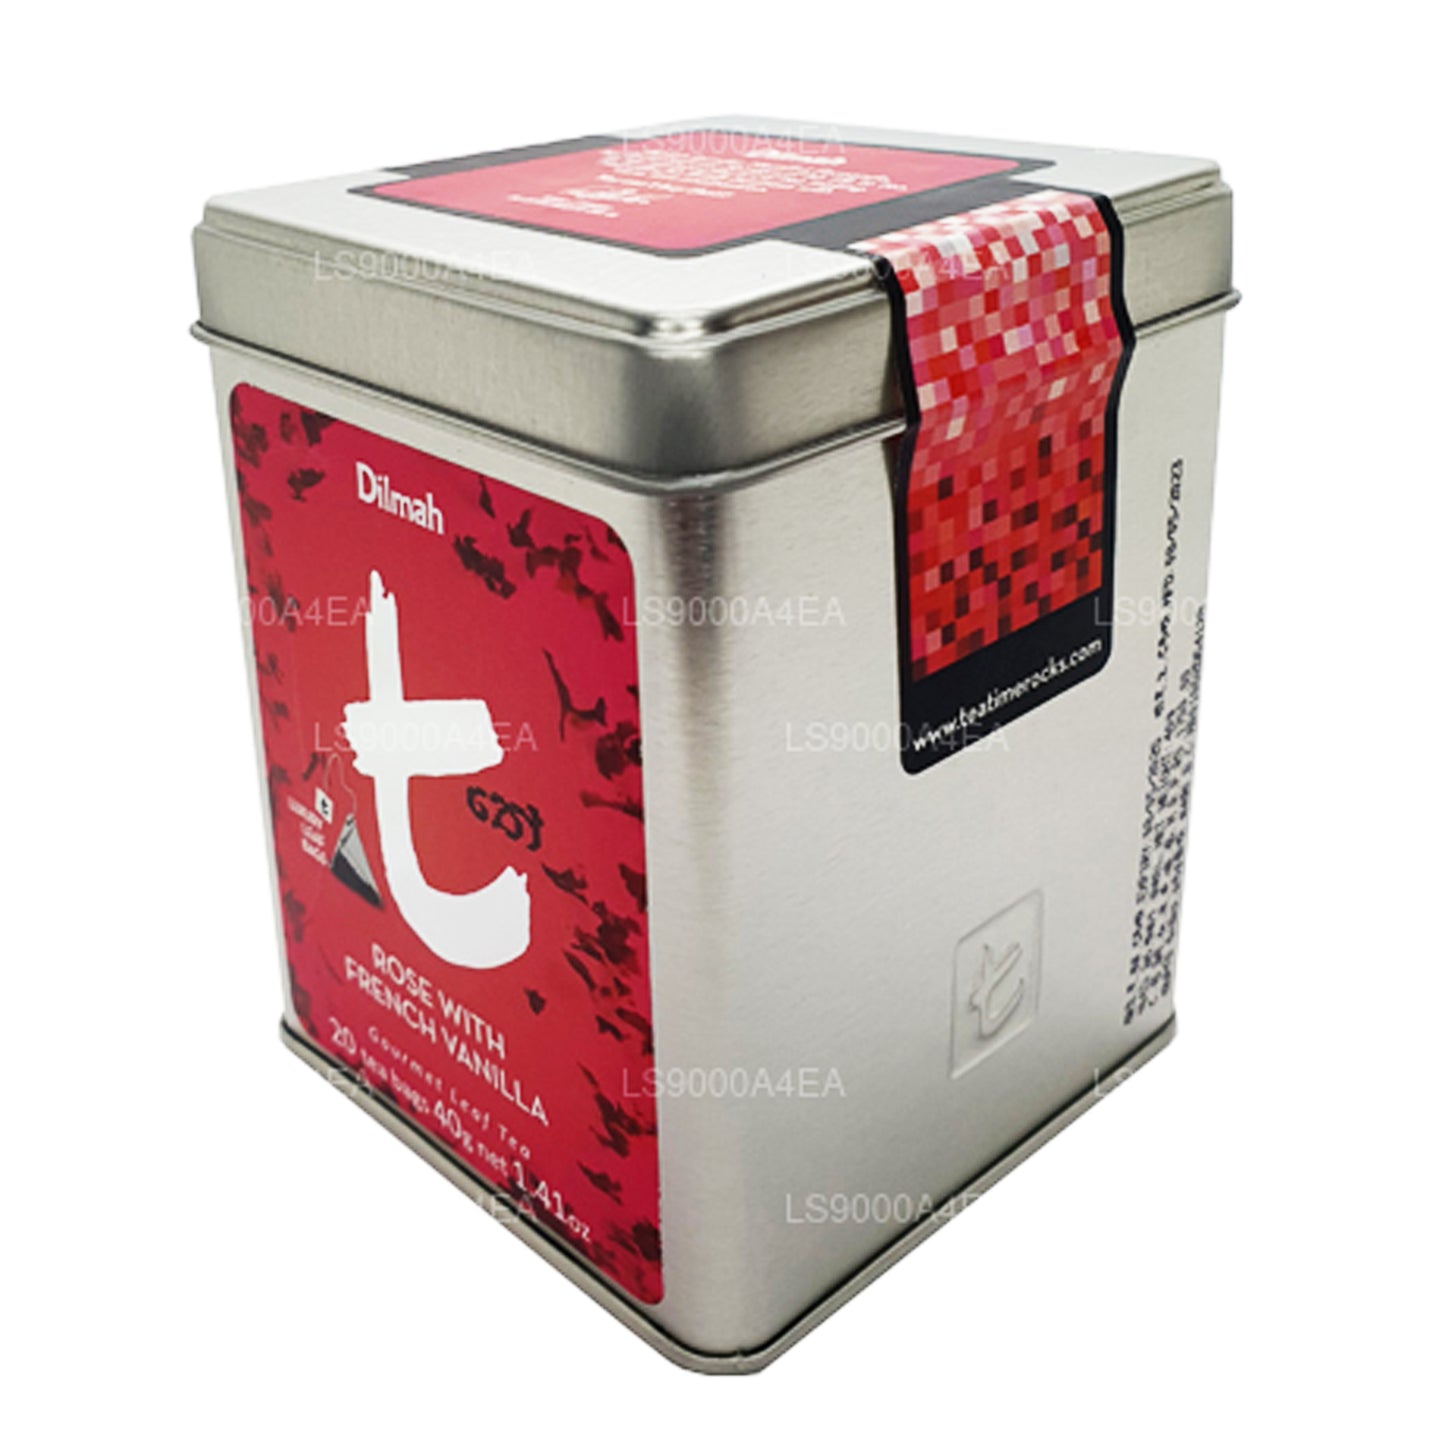 Dilmah t-Series Rose with French Vanilla 20 Tea Bags Leaf Tea (40g)